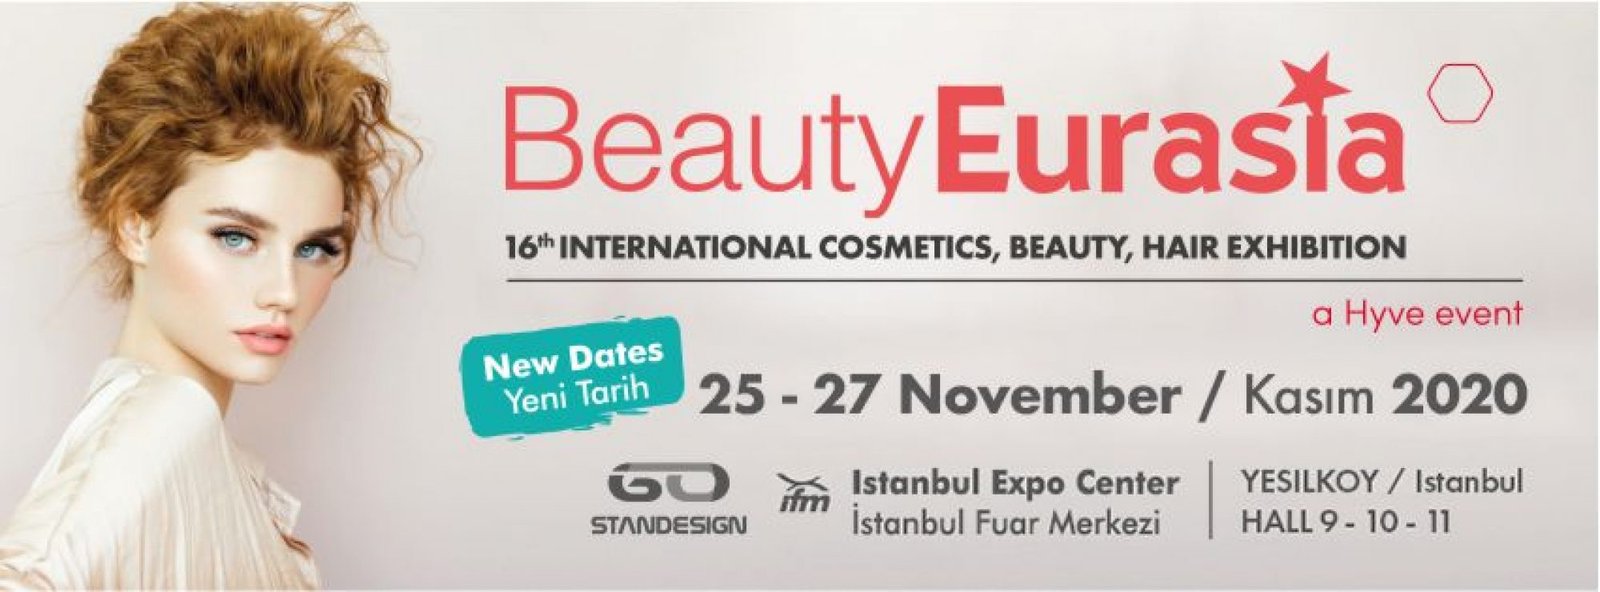 Beauty Eurasia 2020 Stand Construction Go Stand Design